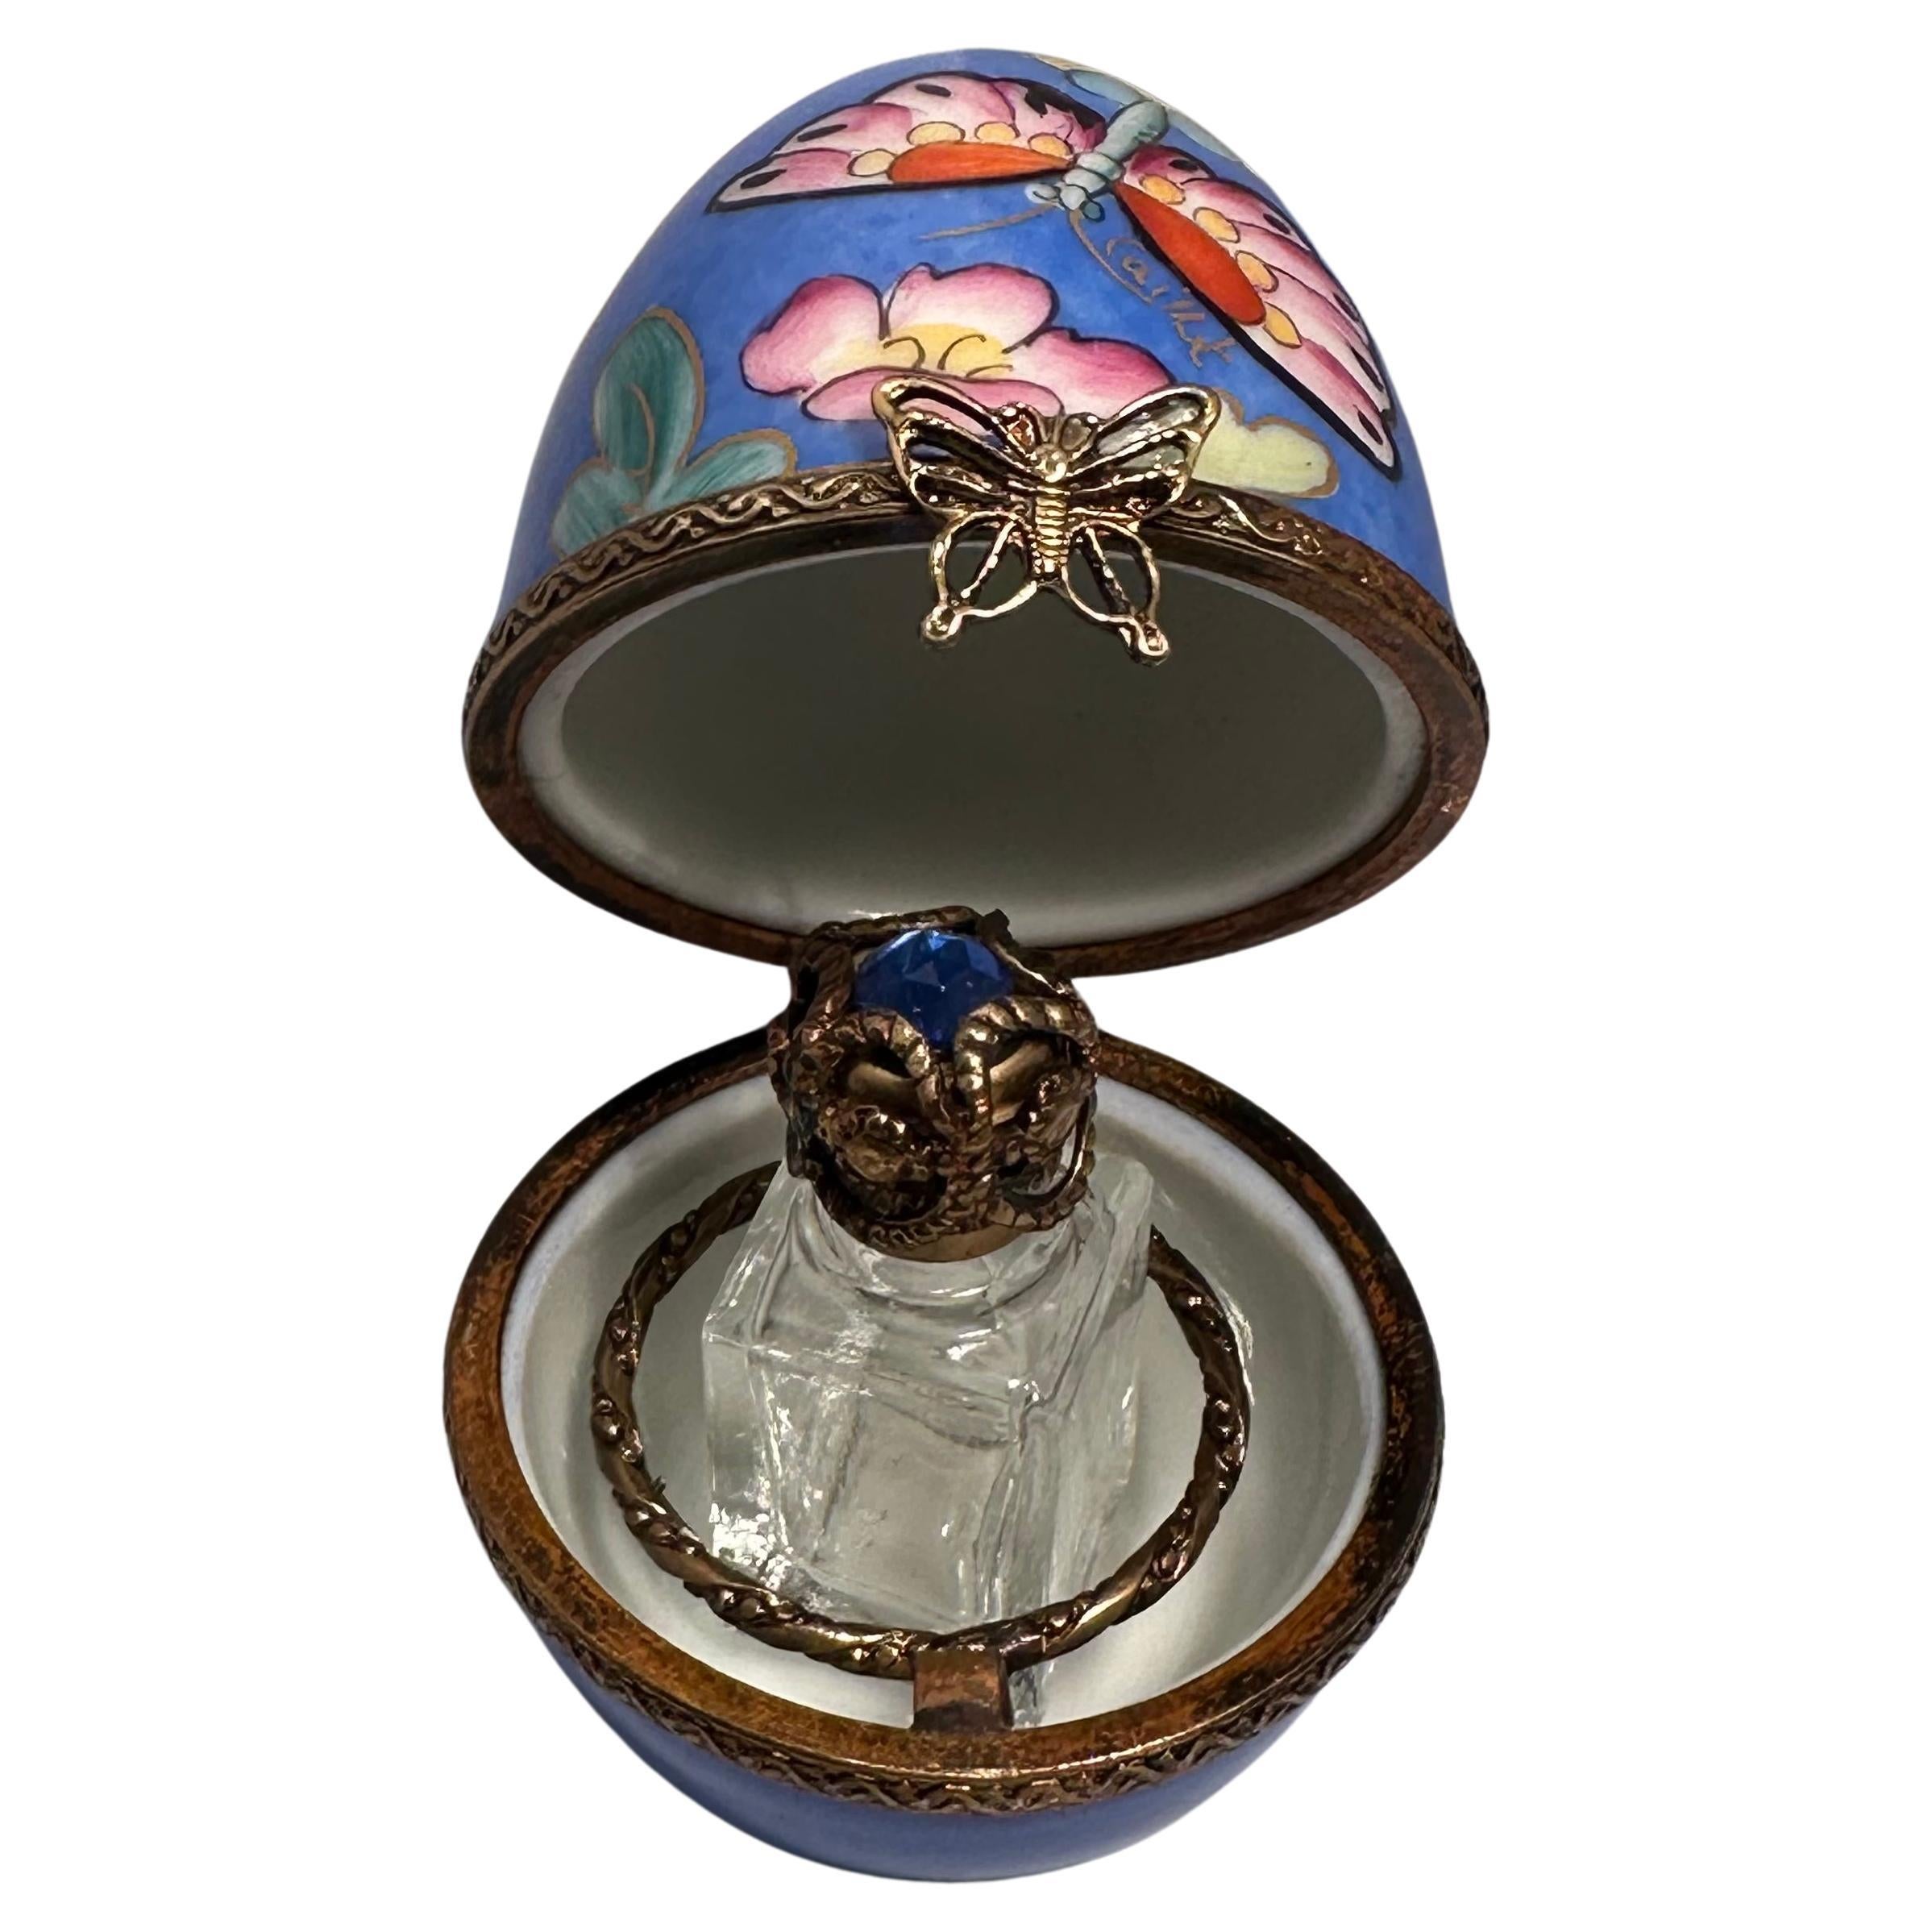 Exquisitely handmade and hand painted miniature Limoges porcelain egg shaped perfume box with a hinged lid is decorated with pretty polychrome flowers and Butterly motif over a soothing blue background. The porcelain box and lid feature rims or